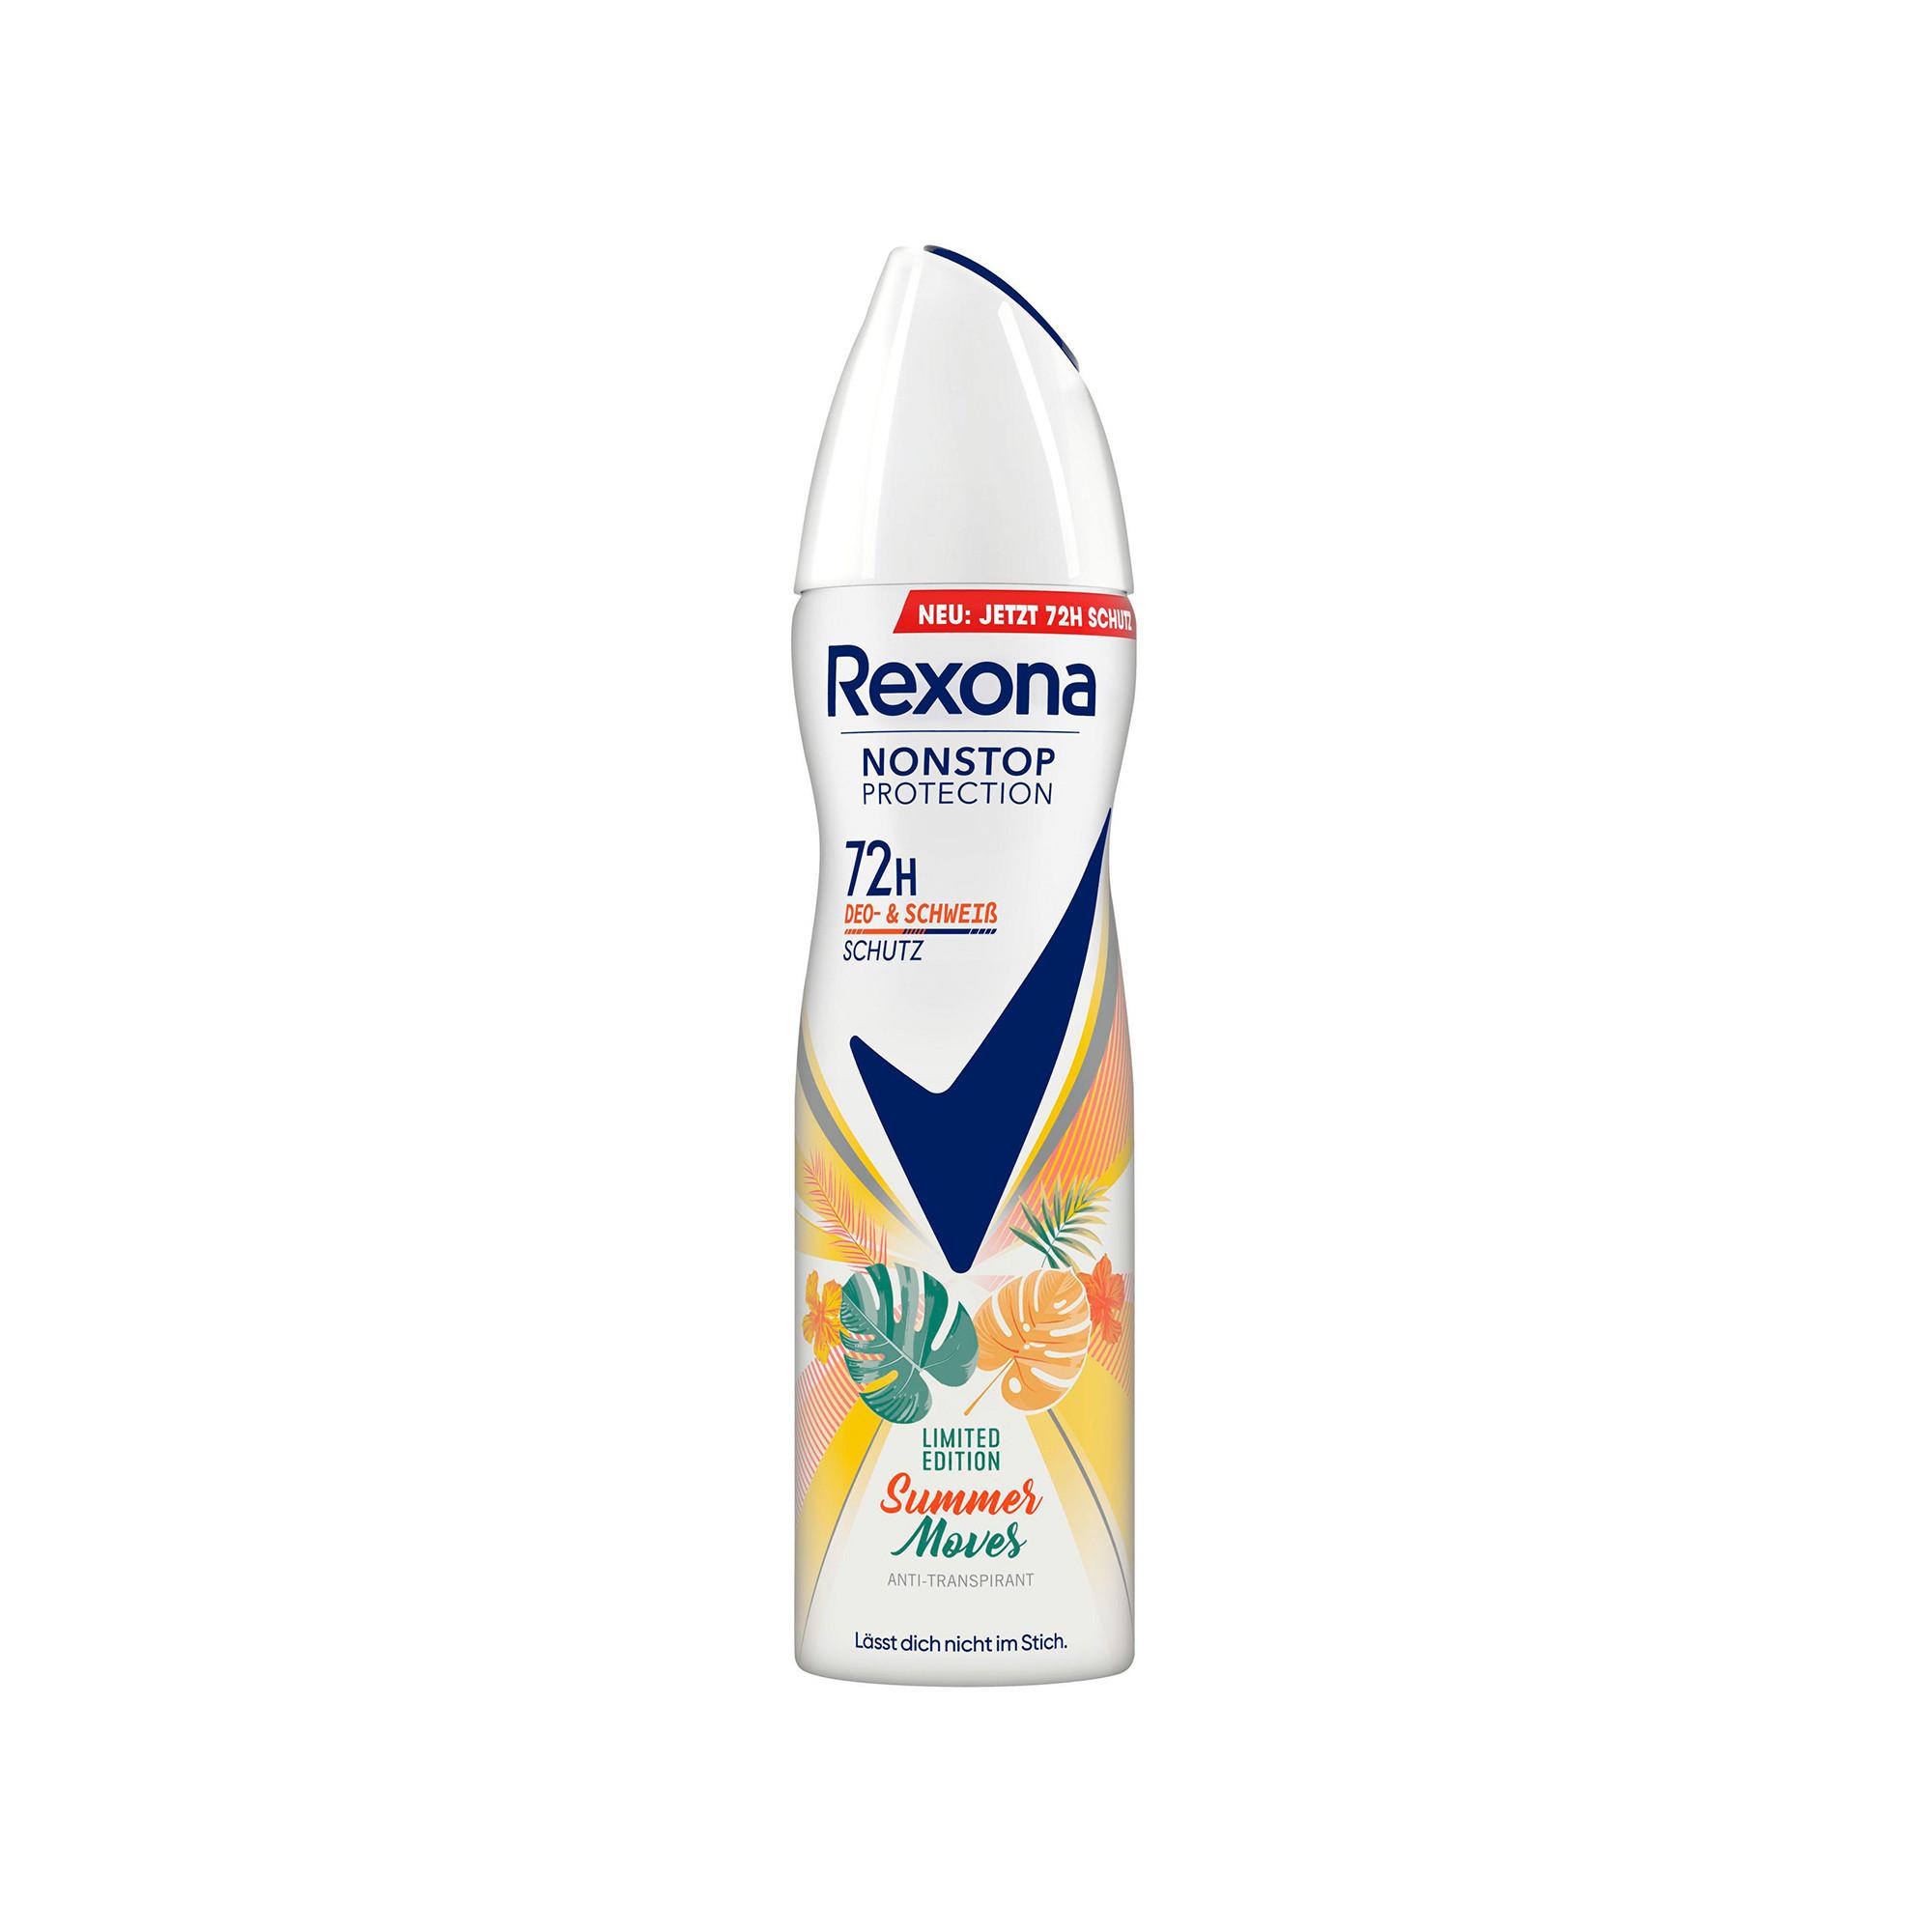 Rexona Nonstop Protection Anti-Transpirant Summer Moves Limited Edition Deospray 